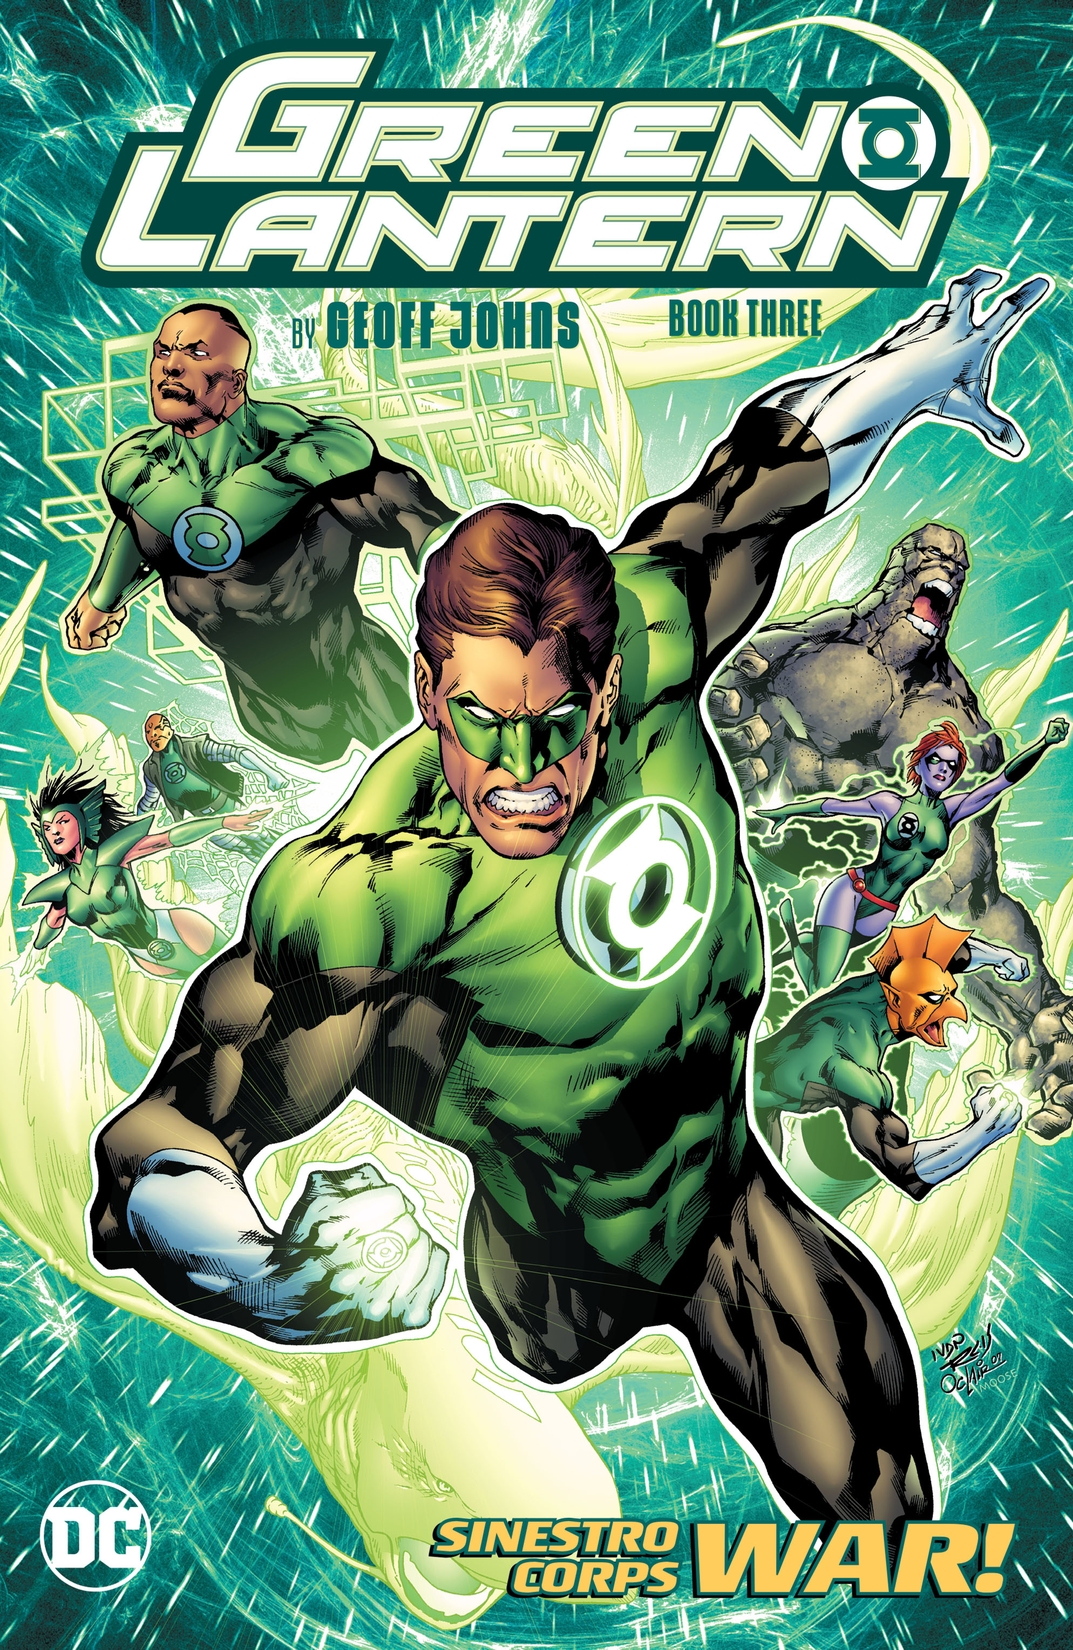 Green Lantern by Geoff Johns Book Three preview images